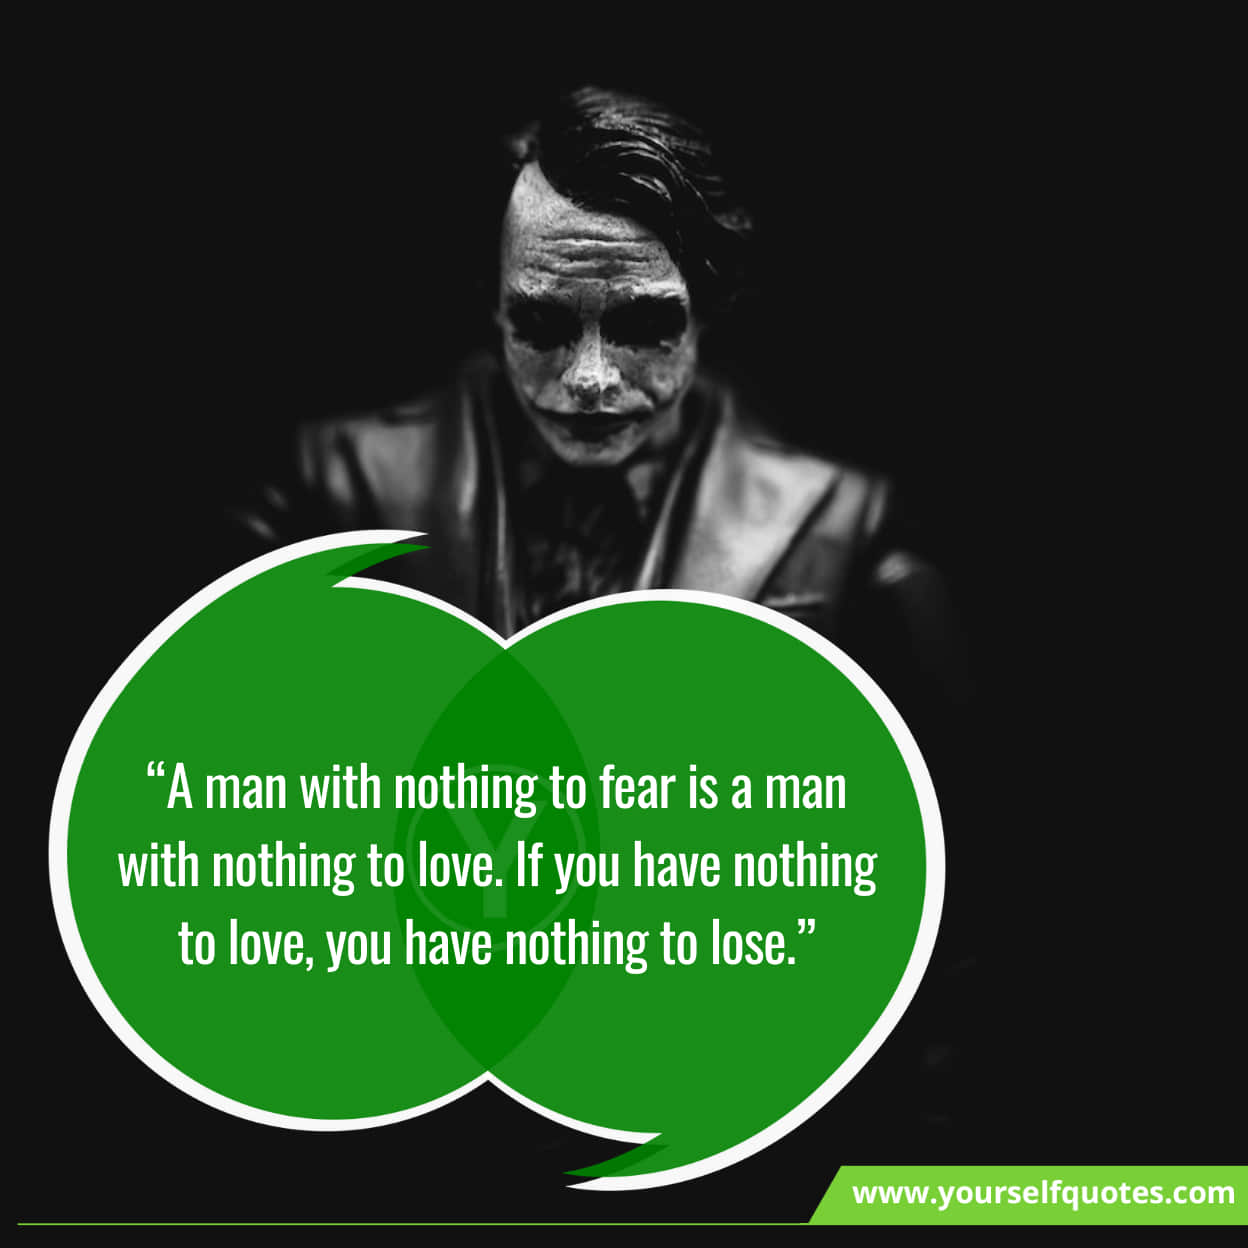 Truth of life quotes by joker